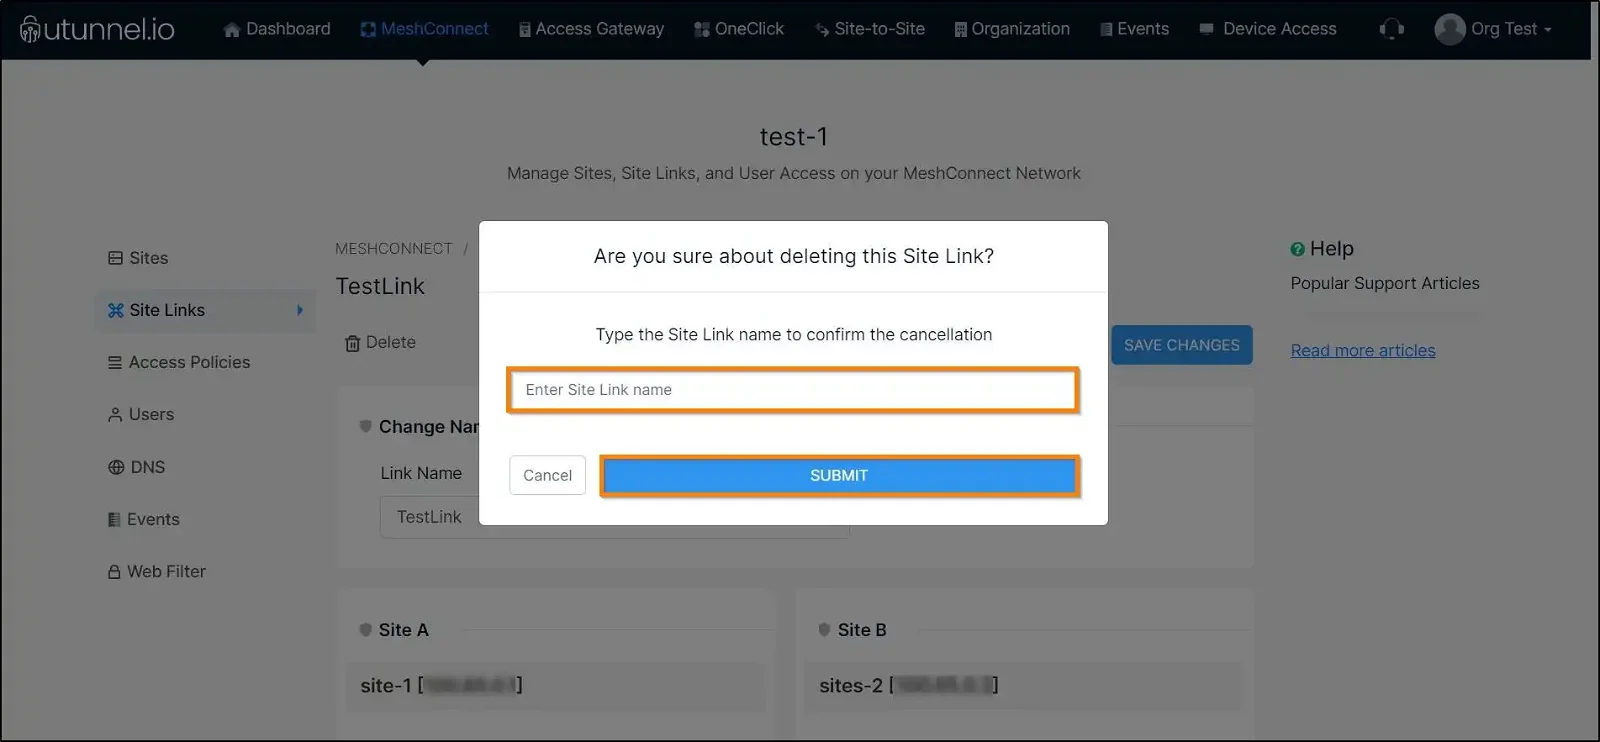 How to configure a Site Link confirm deletion of site link